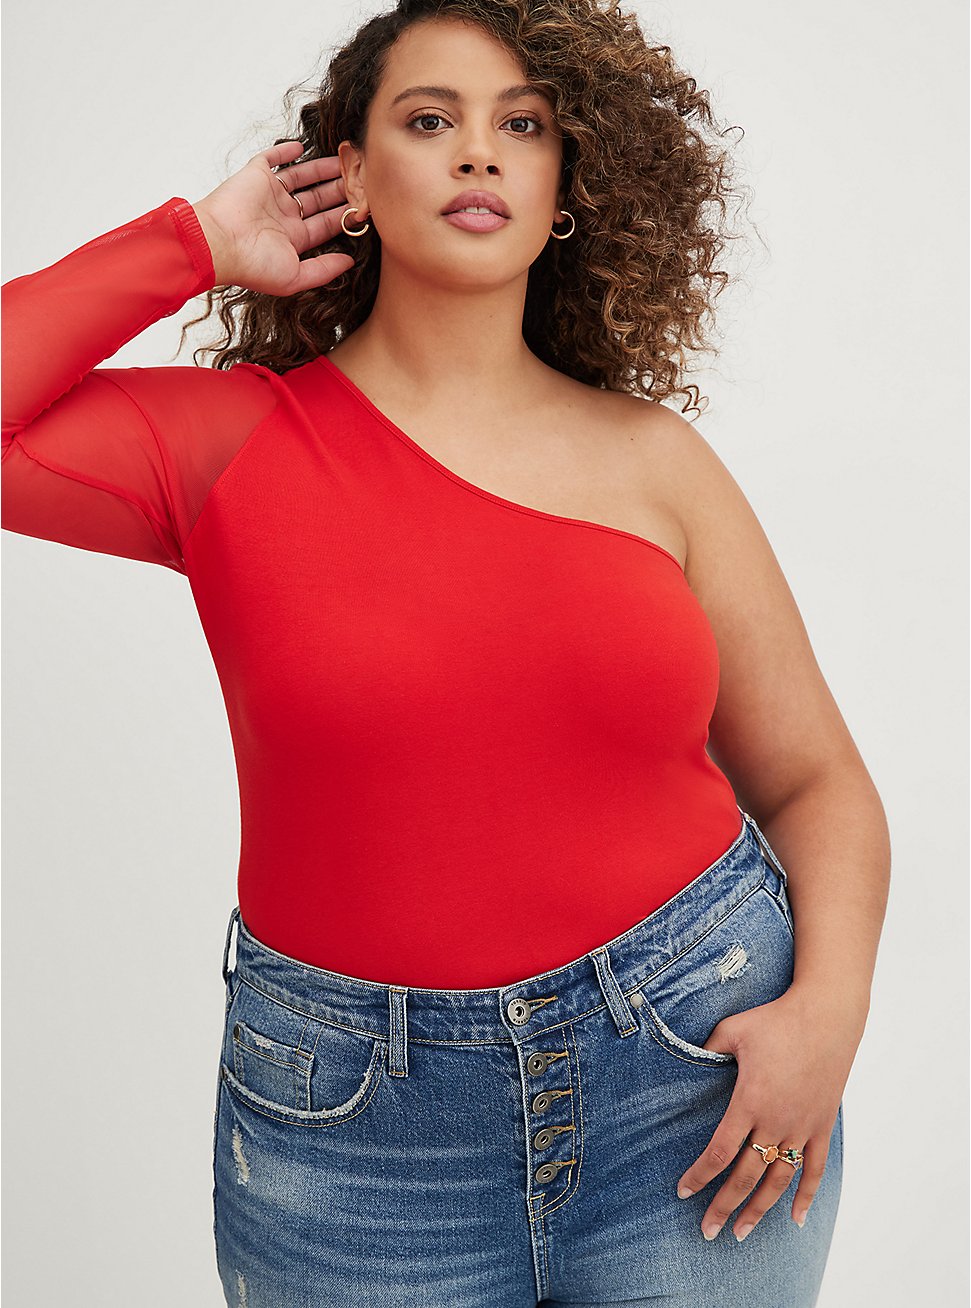 One-Shoulder Top - Foxy & Mesh Red , RED, hi-res